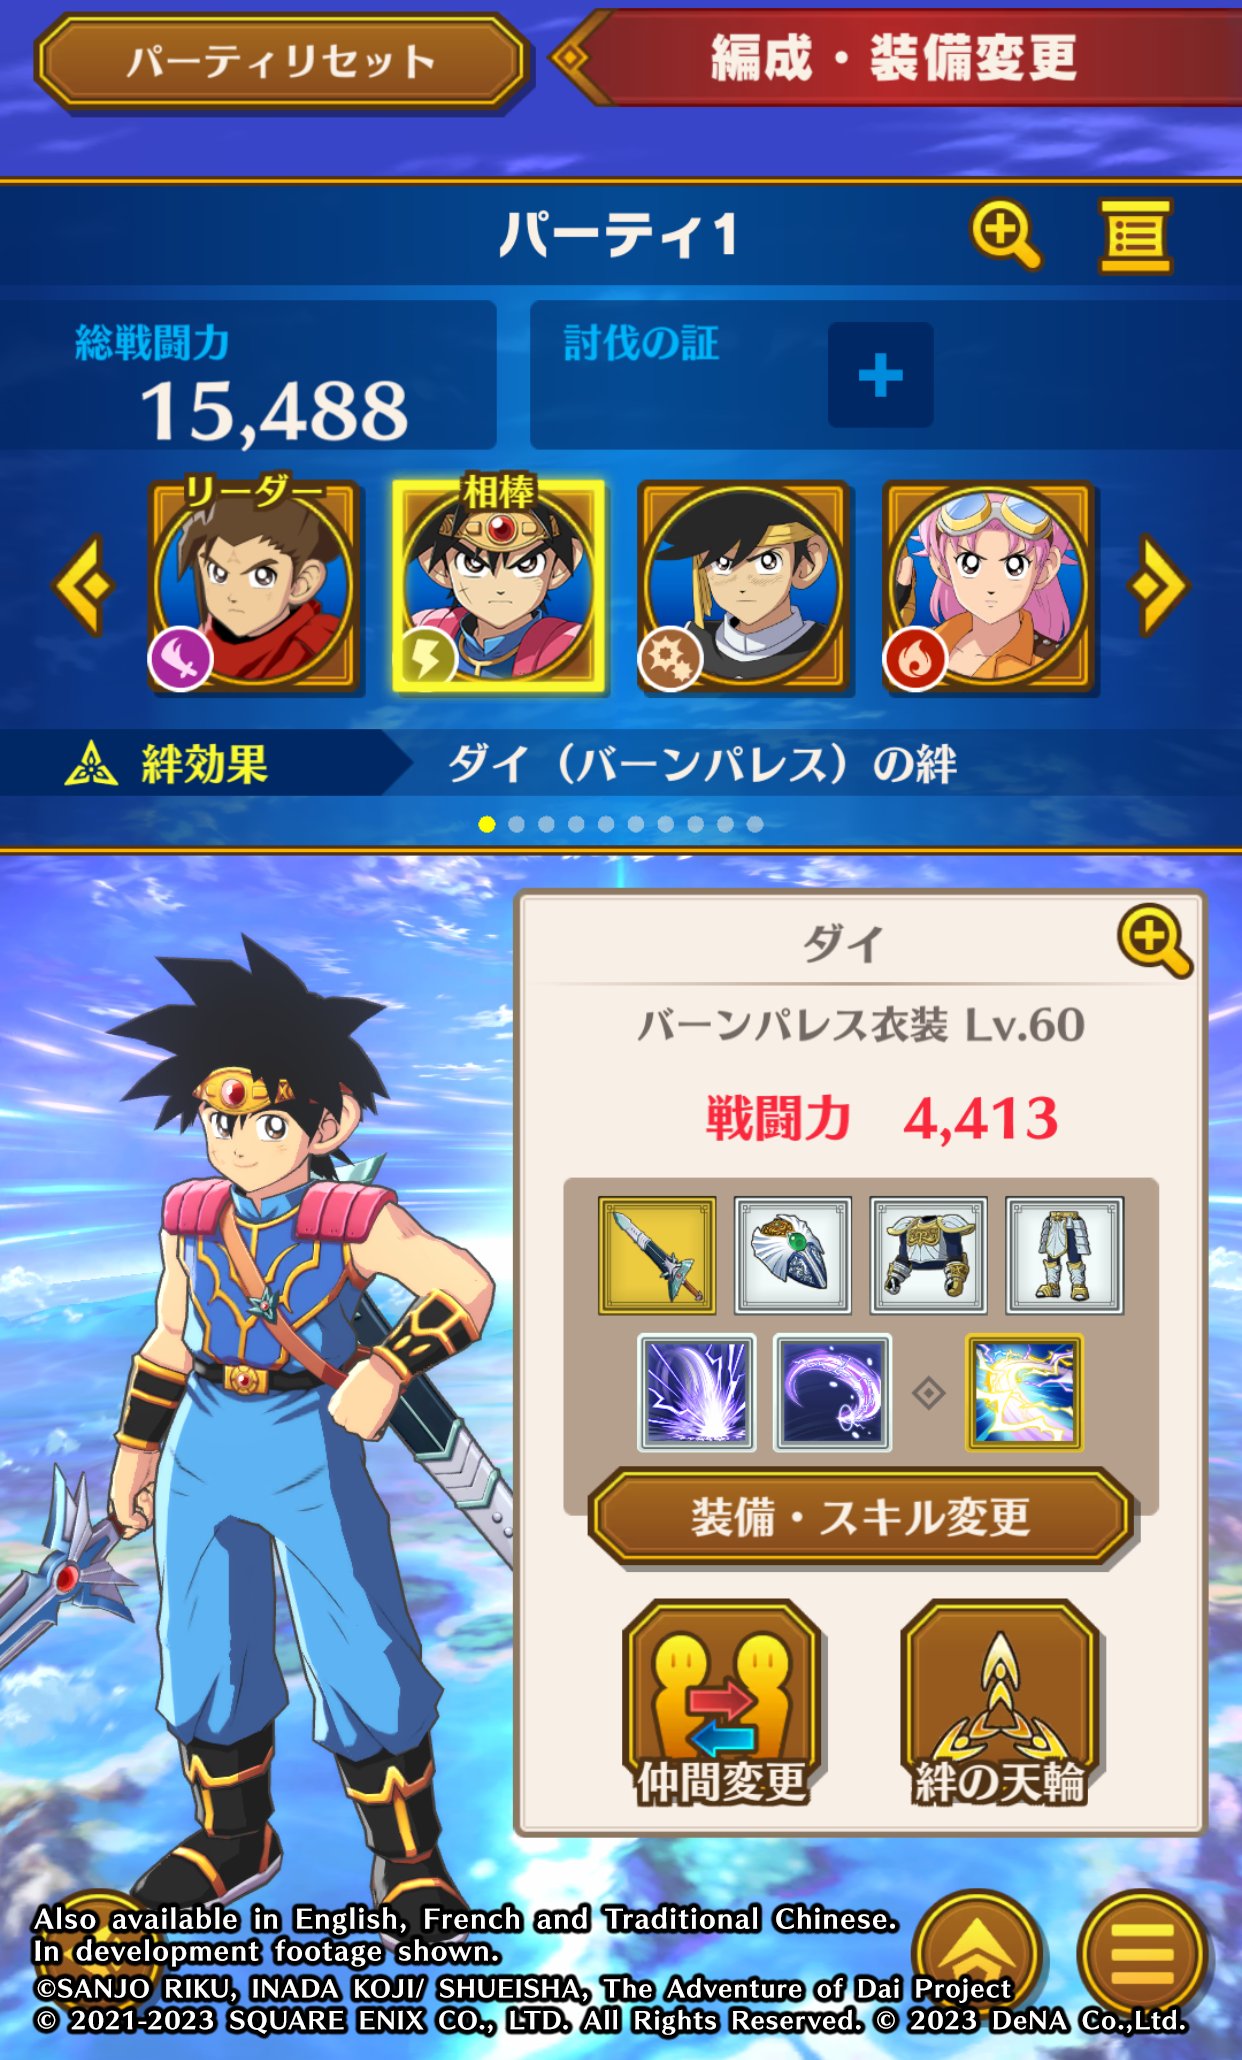 SQUARE ENIX  The Official SQUARE ENIX Website - DRAGON QUEST The Adventure  of Dai: A Hero's Bonds Coming to Mobile Devices on September 28